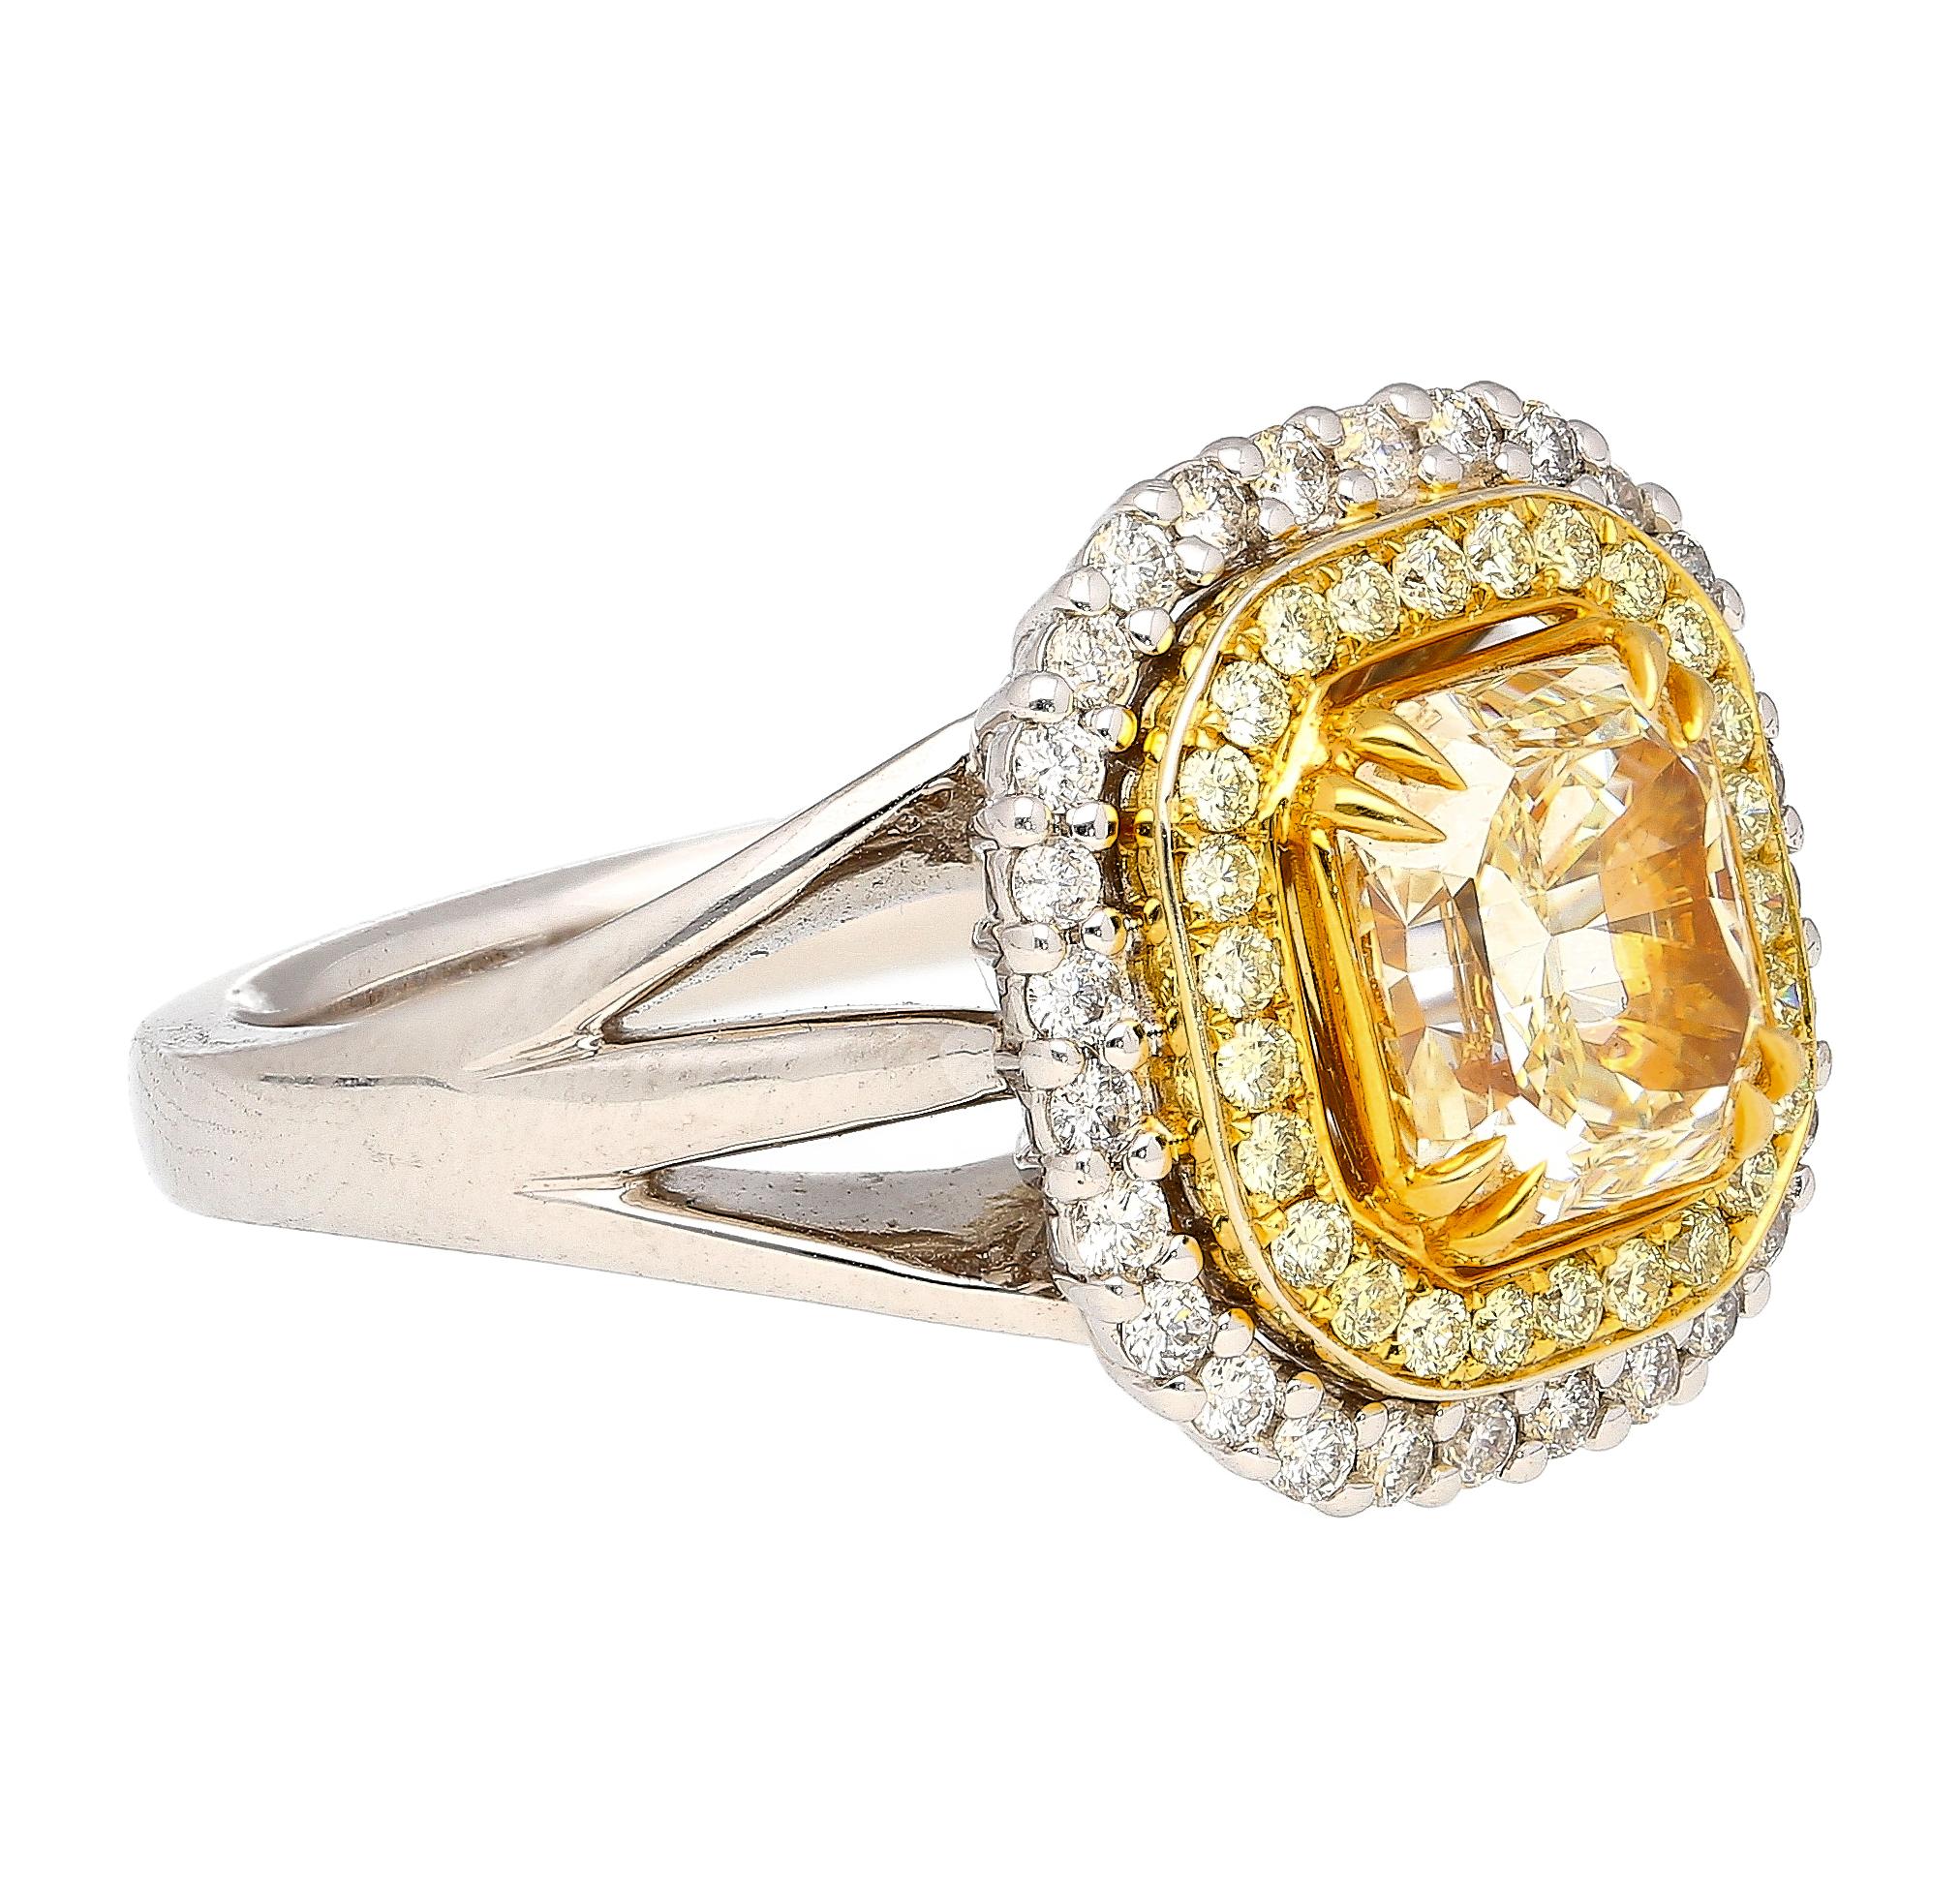 GIA Certified 2.79 Carat Fancy Colored Radiant Cut Diamond 18k Gold Ring In New Condition For Sale In Miami, FL